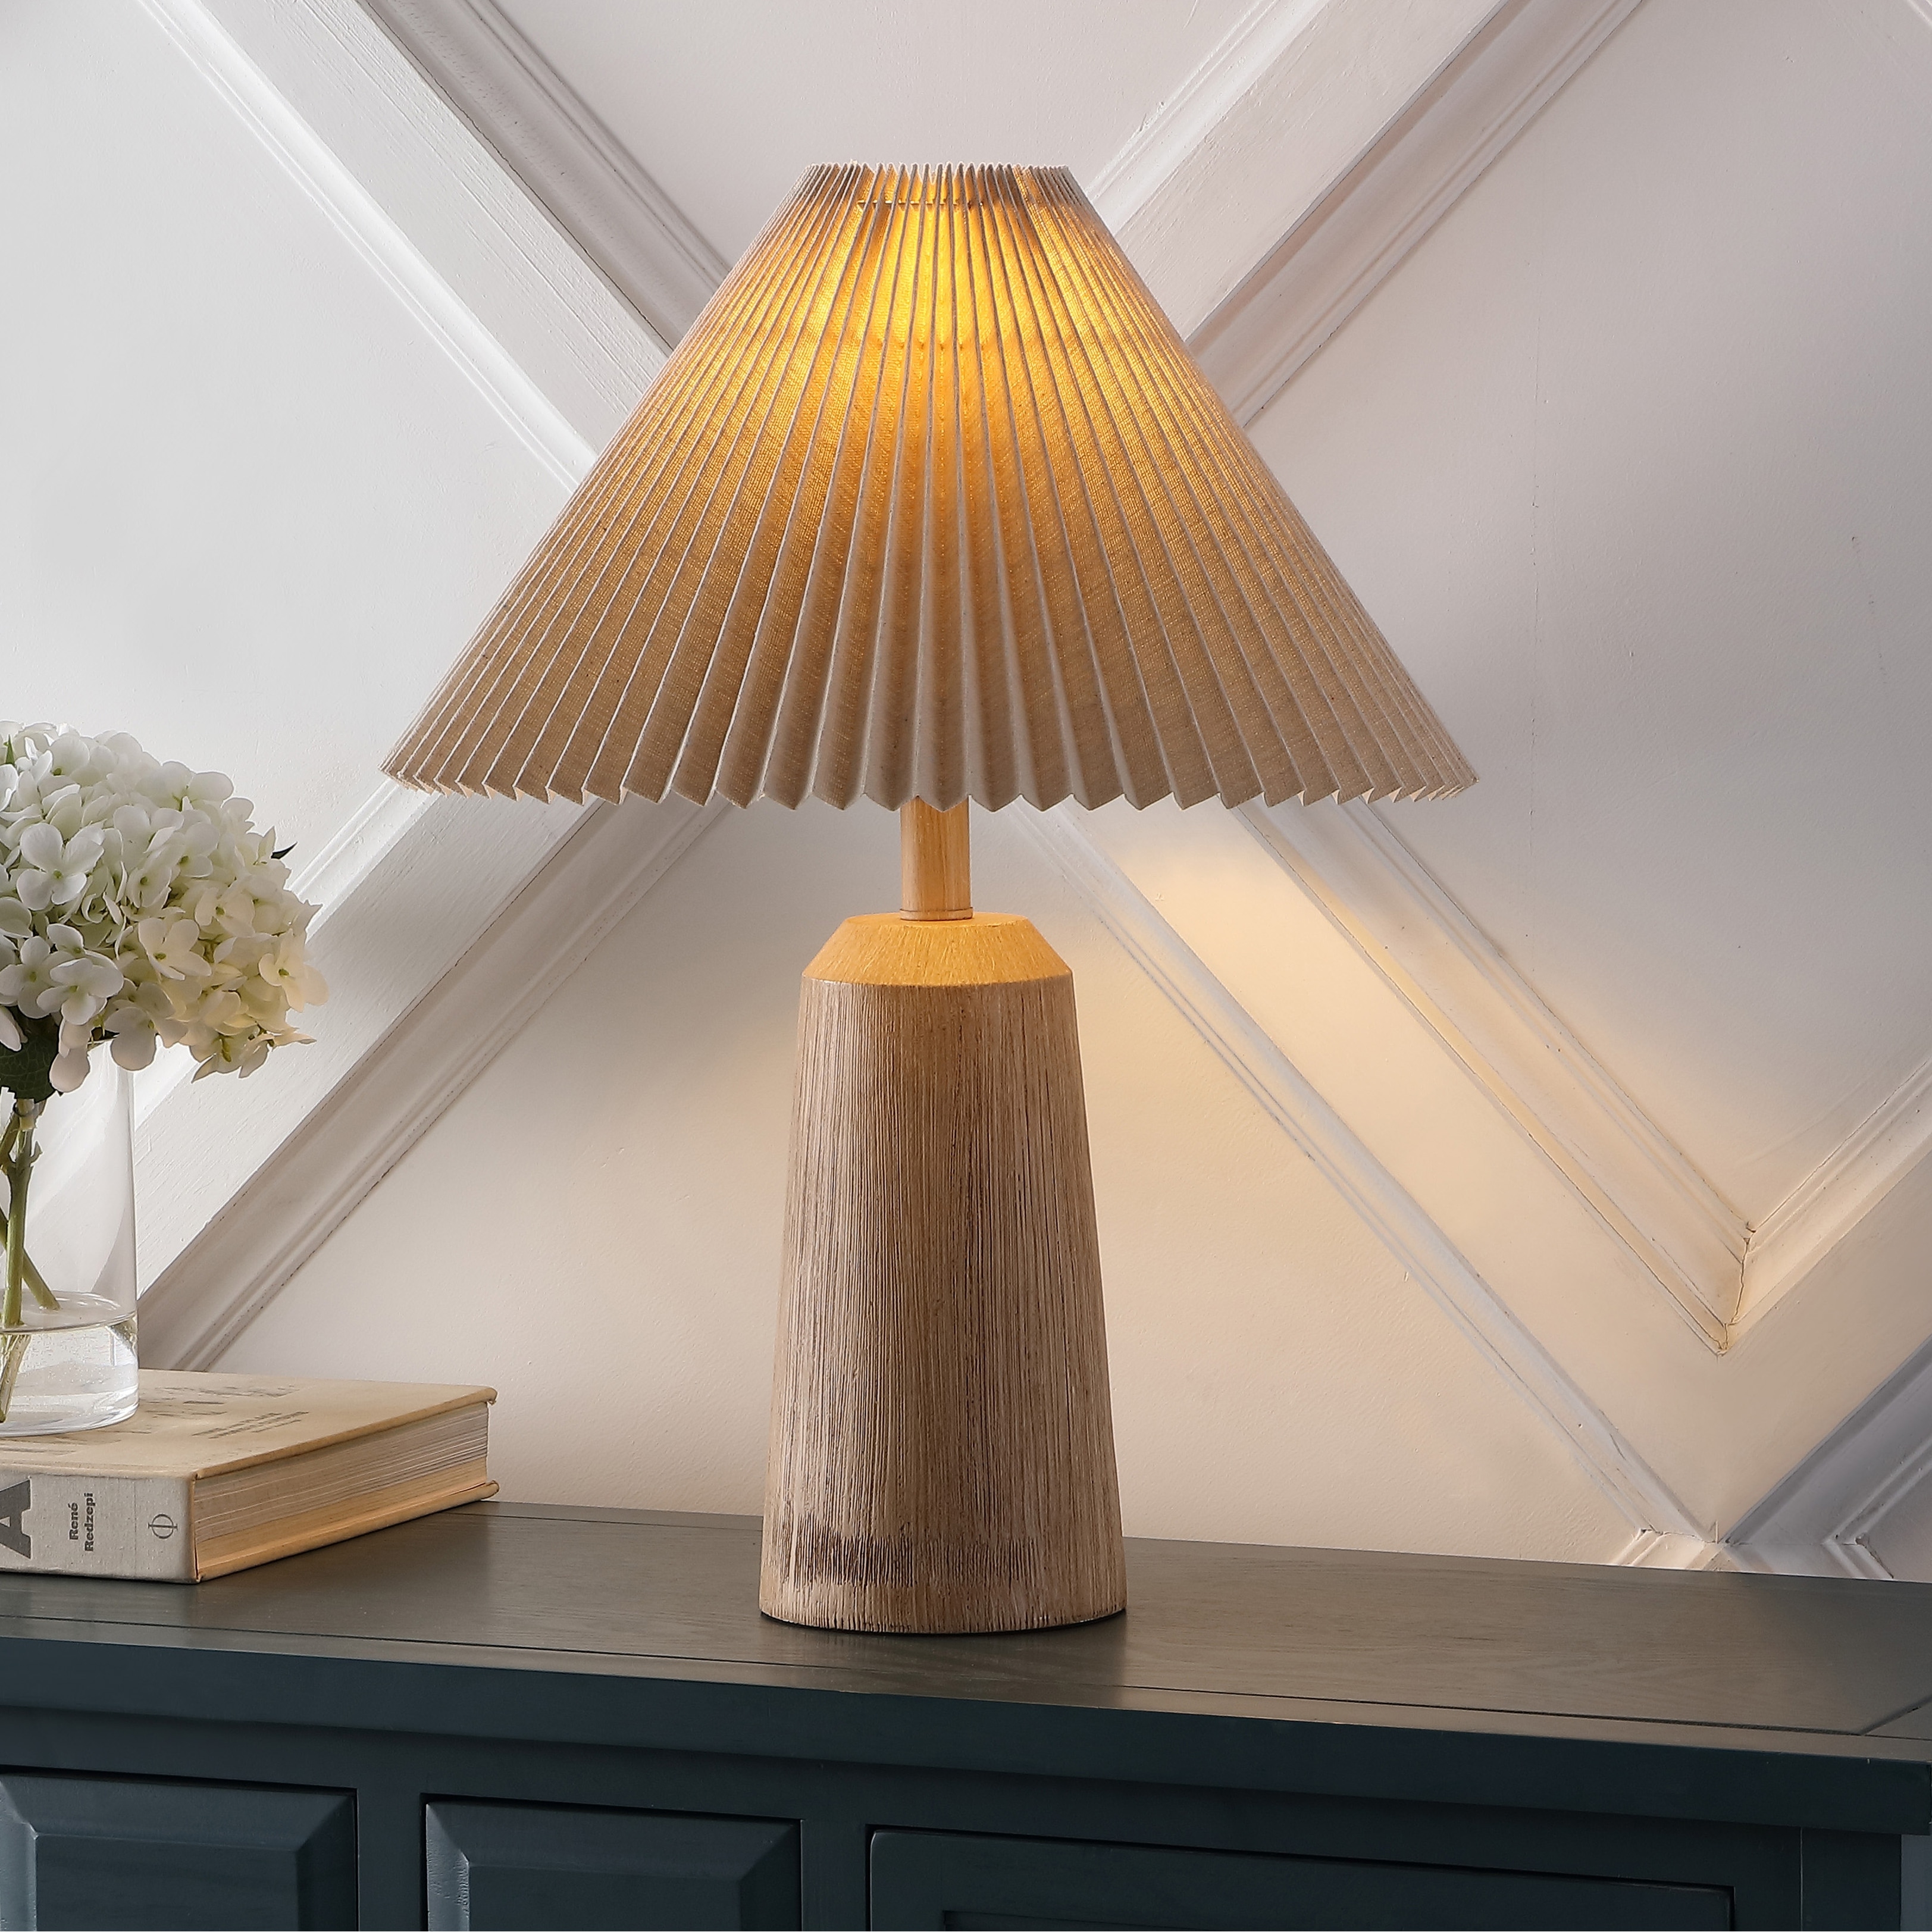 Giulia 20.5" Rustic Scandinavian Resin/Iron Lighthouse LED Table Lamp with Pleated Shade, Beige Wood Finish by JONATHAN Y